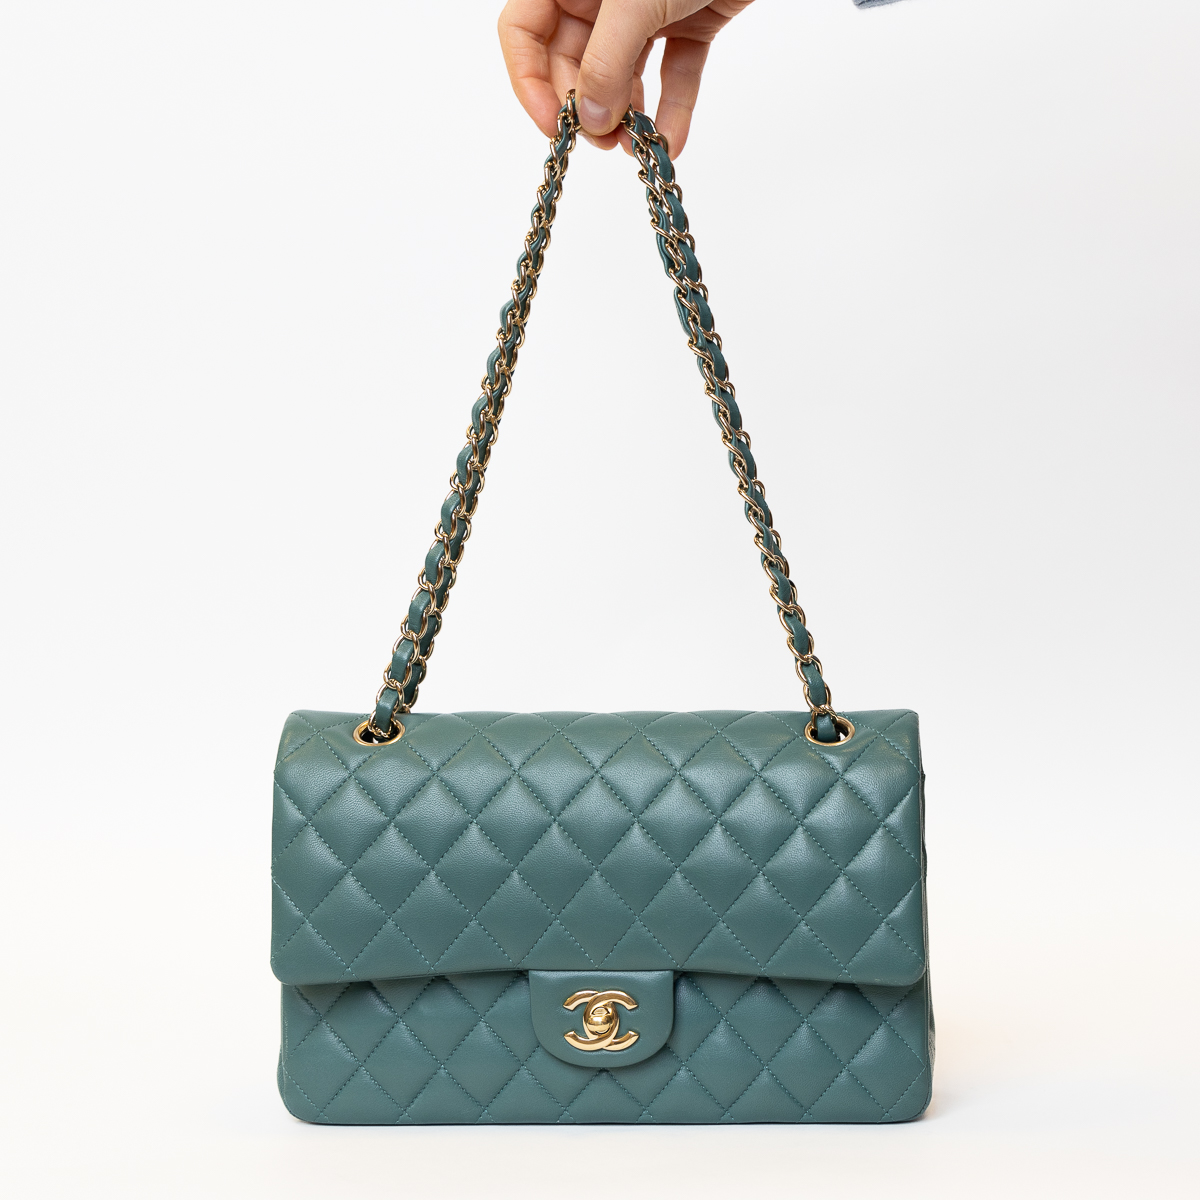 Chanel Timeless Double Flap Lambskin Medium Bag Teal with Champagne Gold Hardware